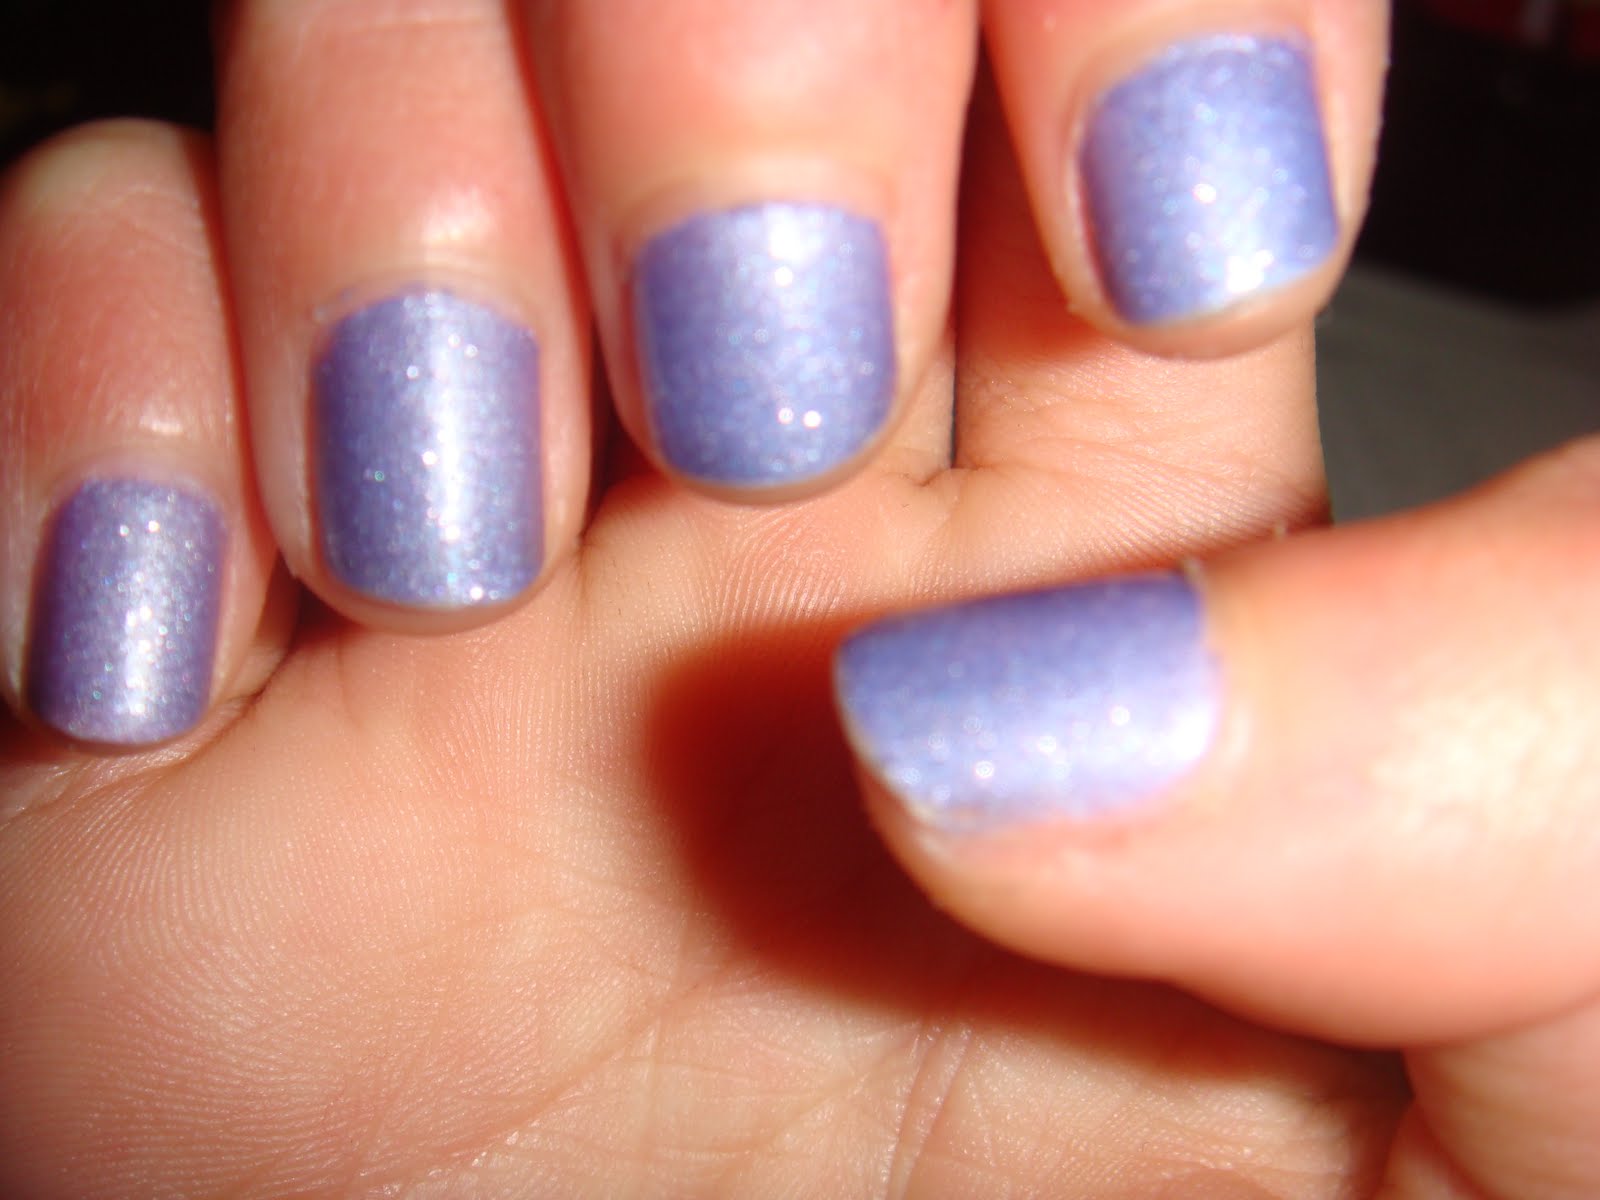 3. Essie Color Changing Nail Polish - wide 7